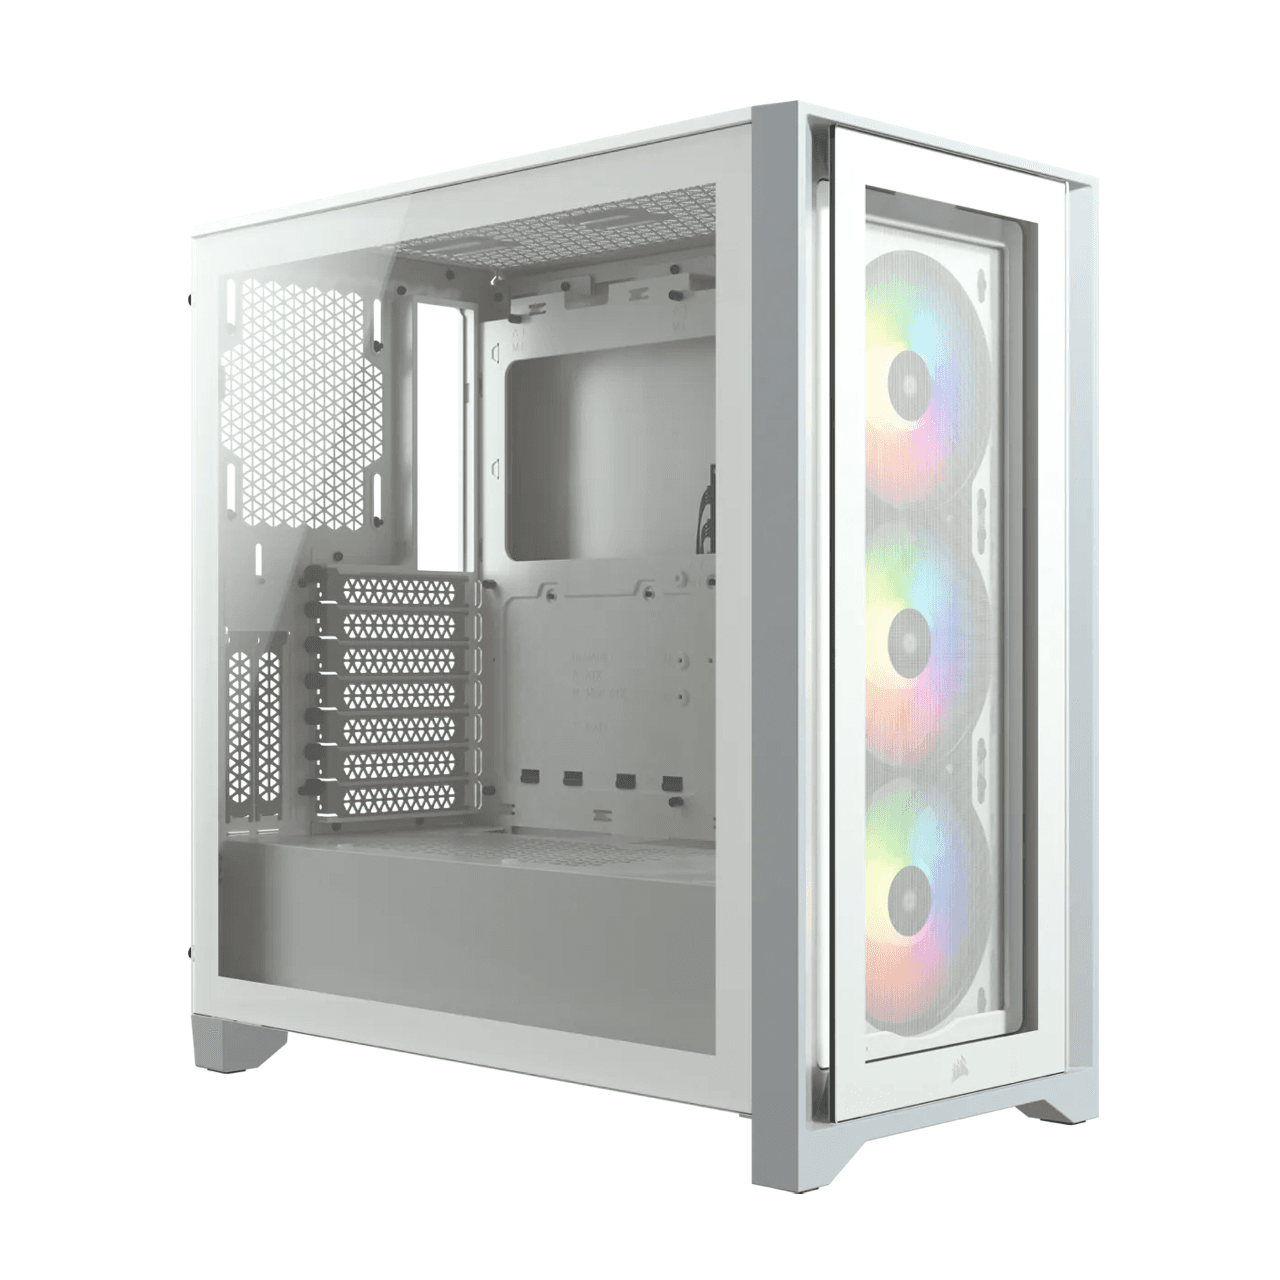 ICUE 4000X RGB TEMPERED GLASS MID-TOWER WH